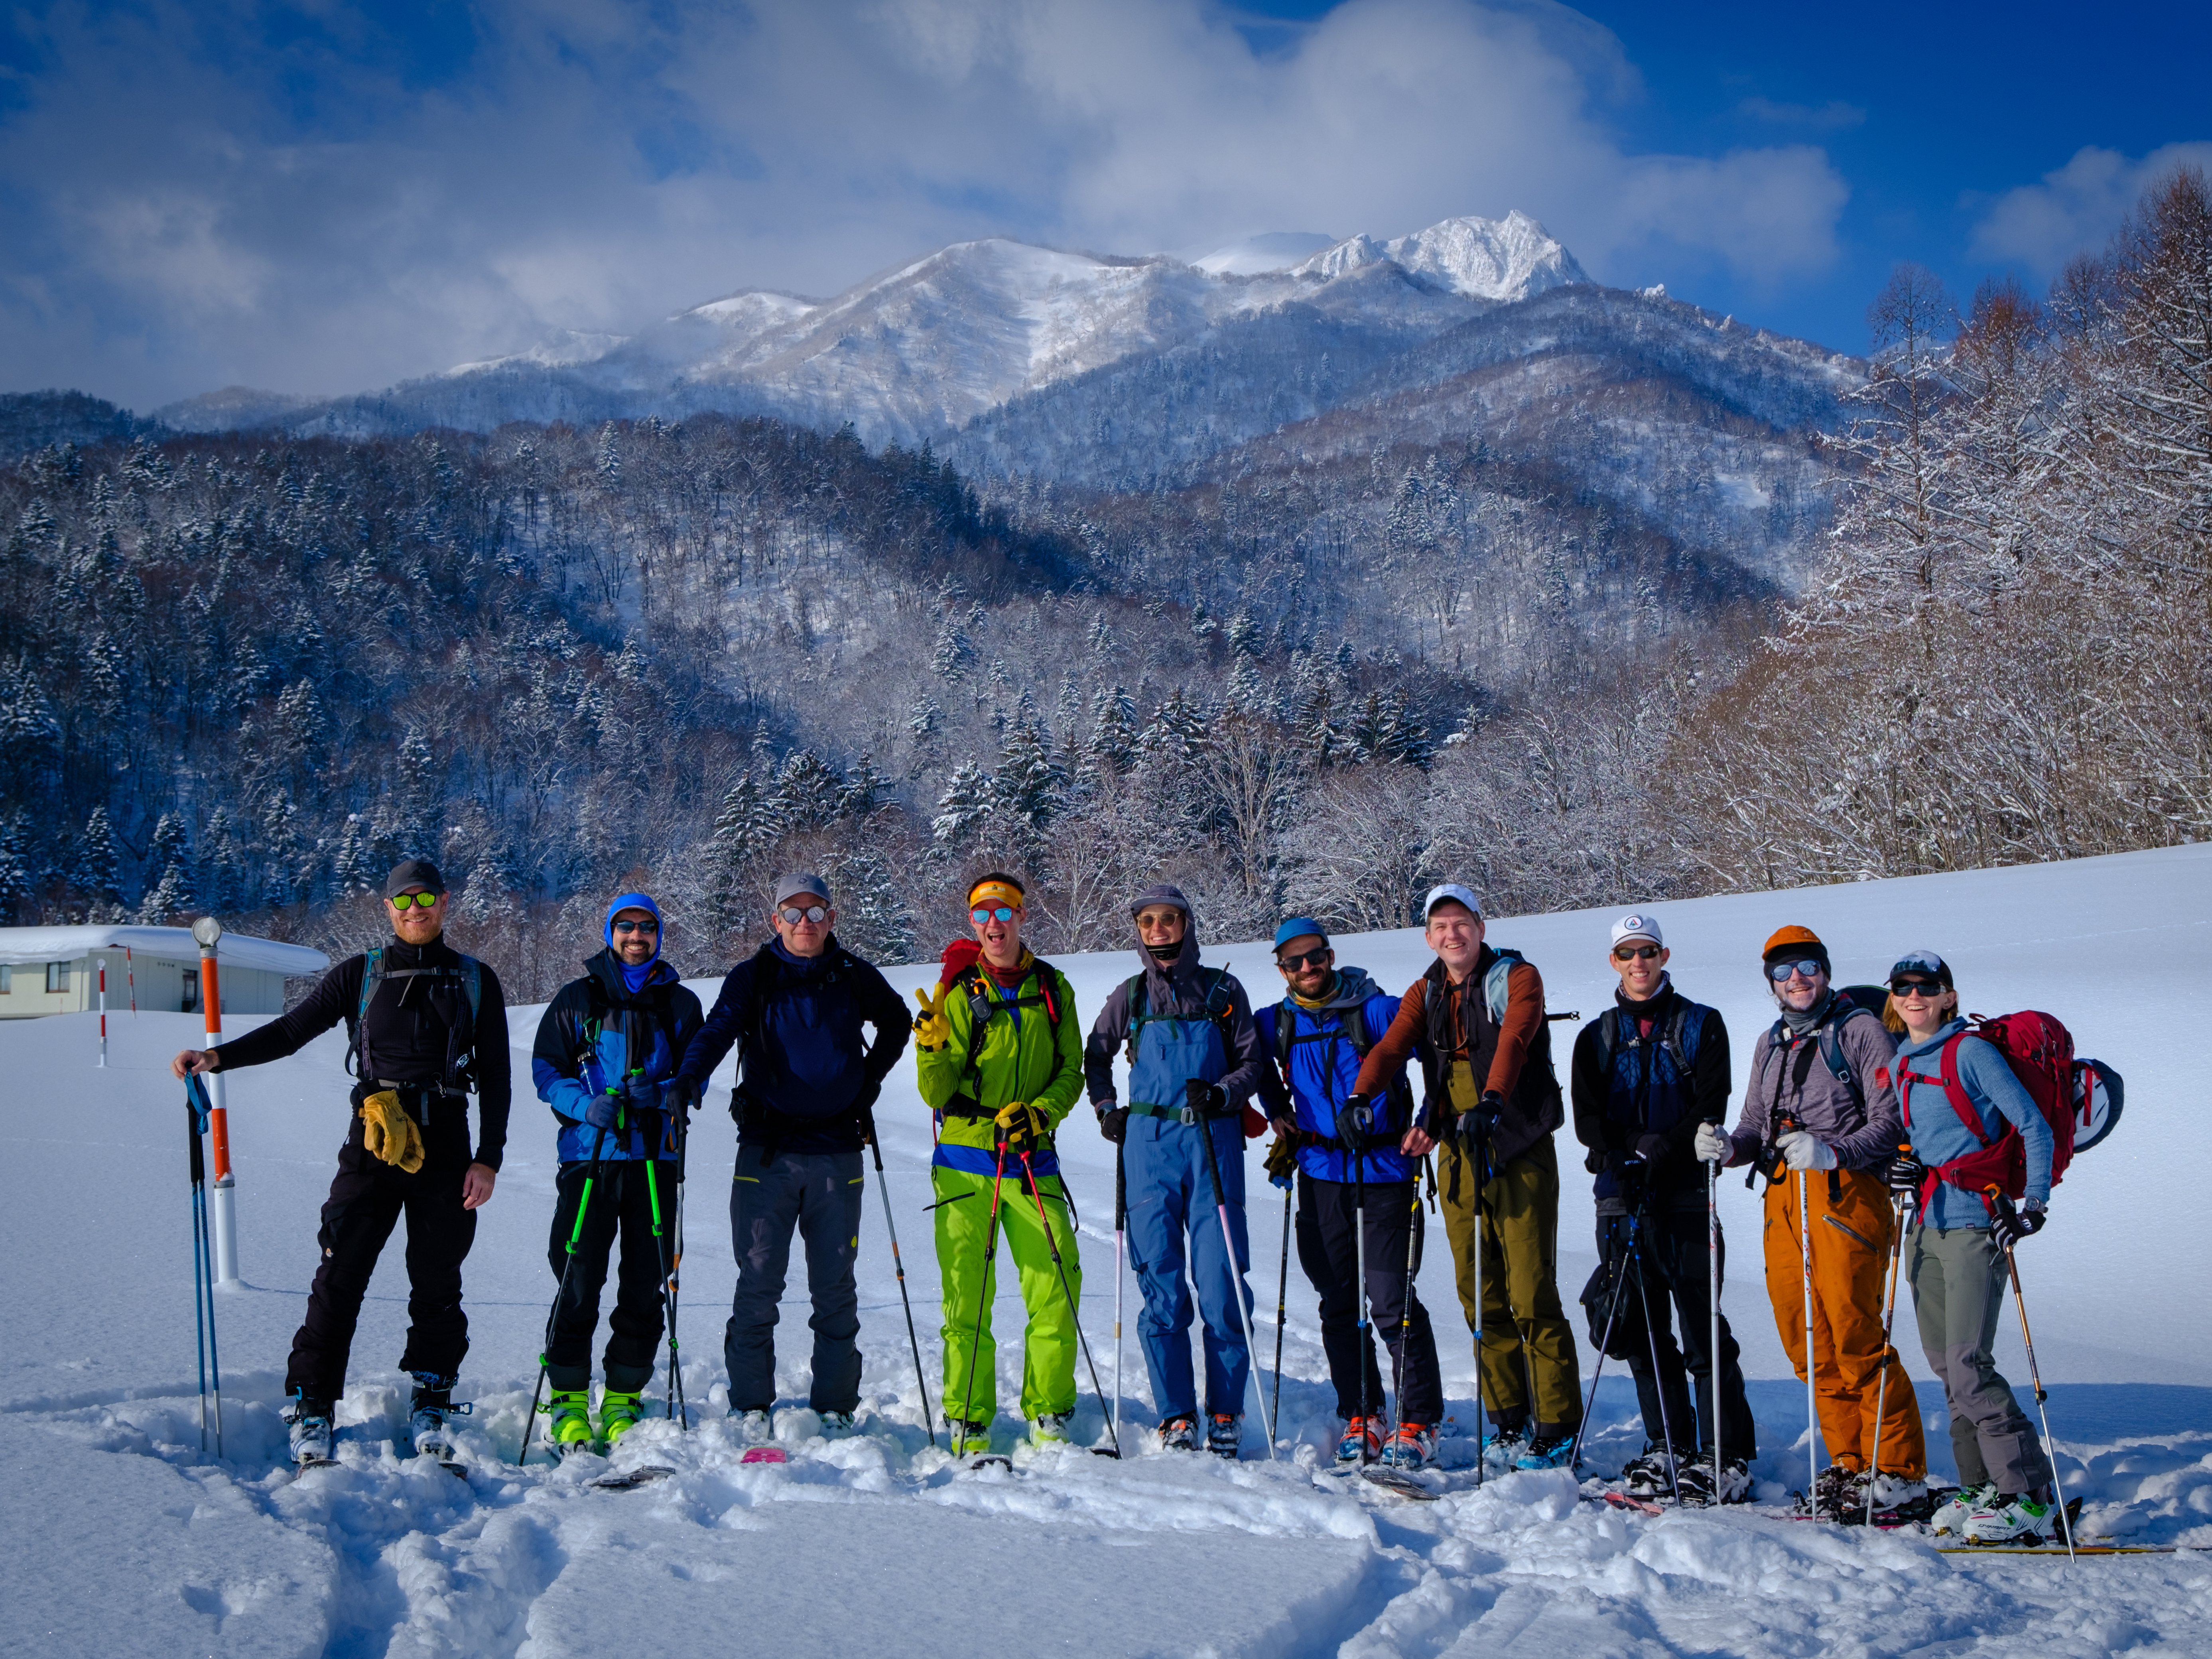 10 skiers gathered for a photo with tall snow-covered mountains in the background